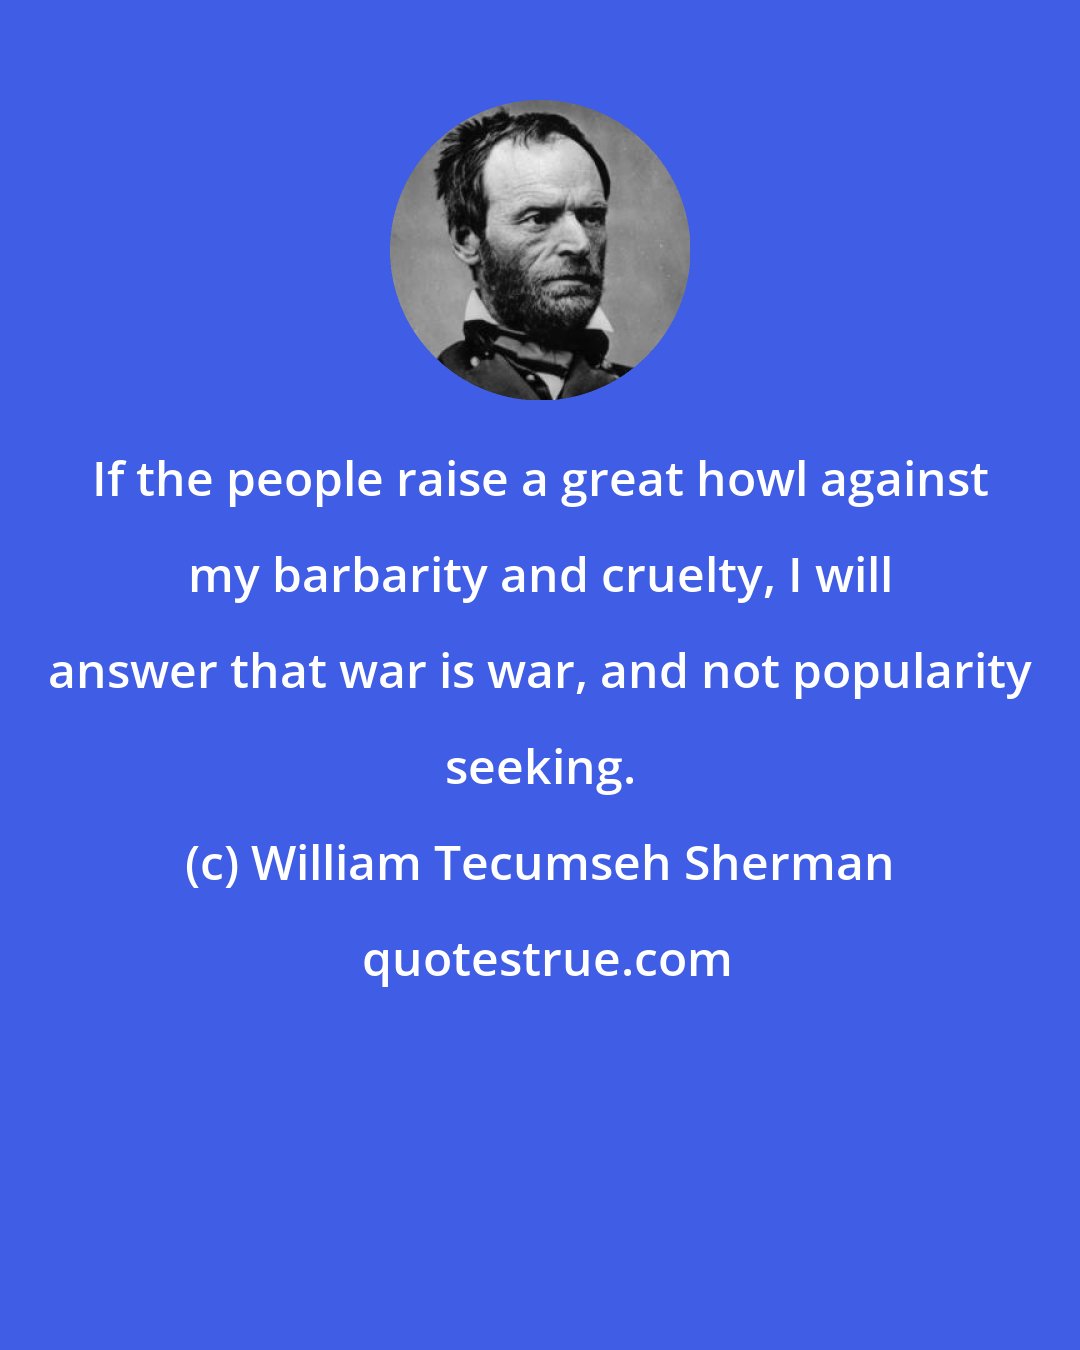 William Tecumseh Sherman: If the people raise a great howl against my barbarity and cruelty, I will answer that war is war, and not popularity seeking.